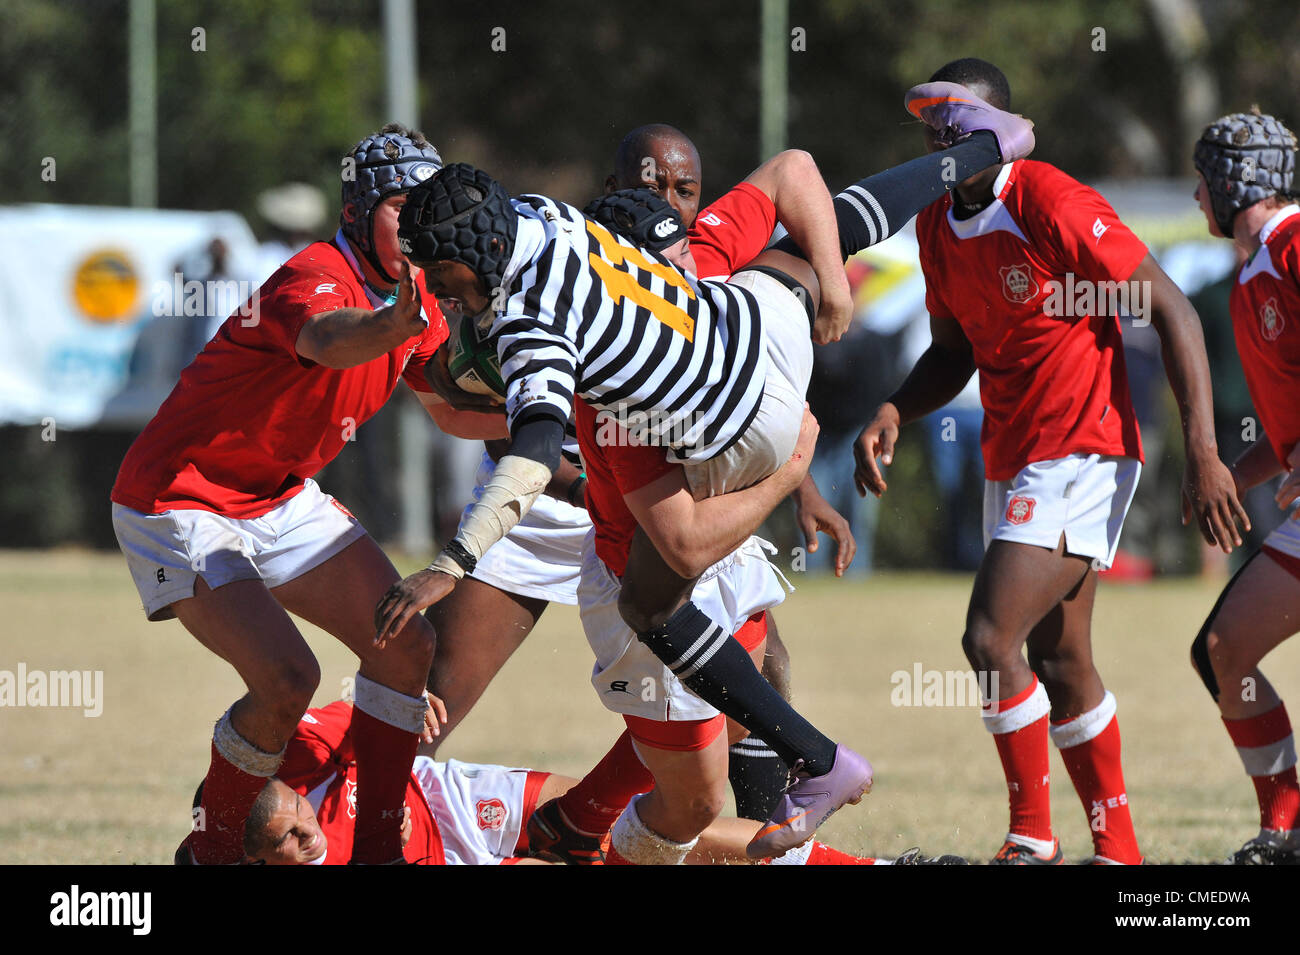 JOHANNESBURG, SOUTH AFRICA - JULY 28, Sibusiso Kunene of Jeppe tackled during the FNB Classic Clashes match between Jeppe (Black/White) and KES (Red/White)from Jeppe Boys High on July 28, 2012 in Johannesburg, South Africa Photo by Duif du Toit / Gallo Images Stock Photo